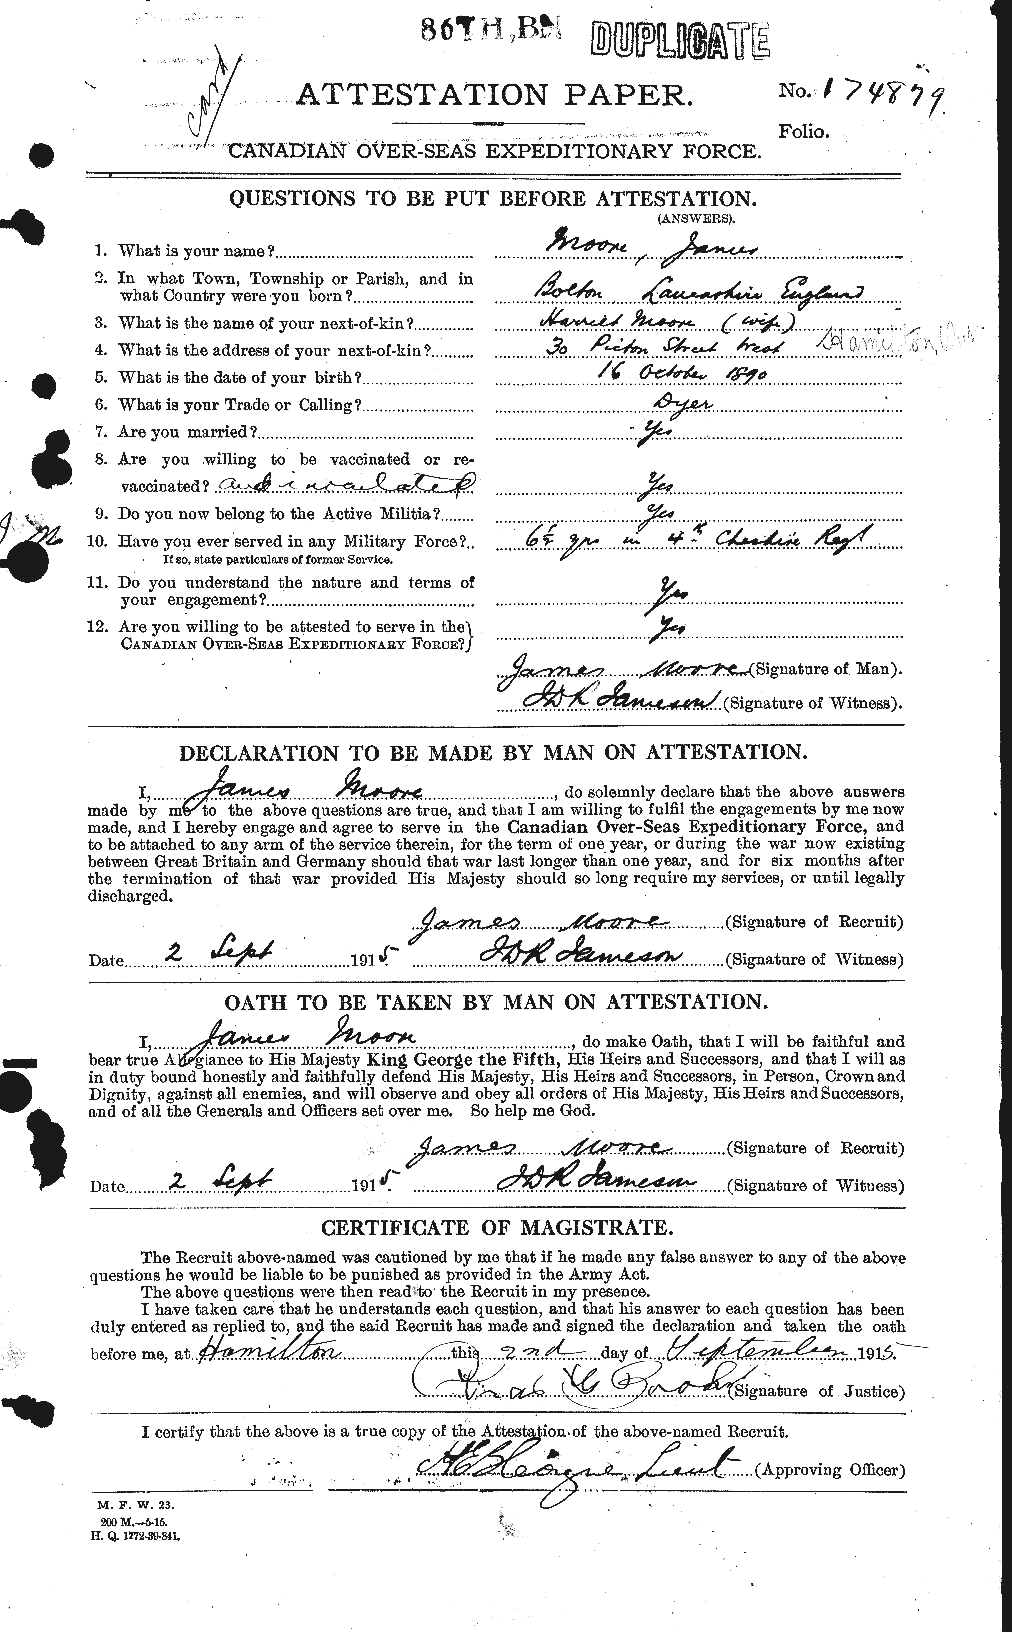 Personnel Records of the First World War - CEF 502181a